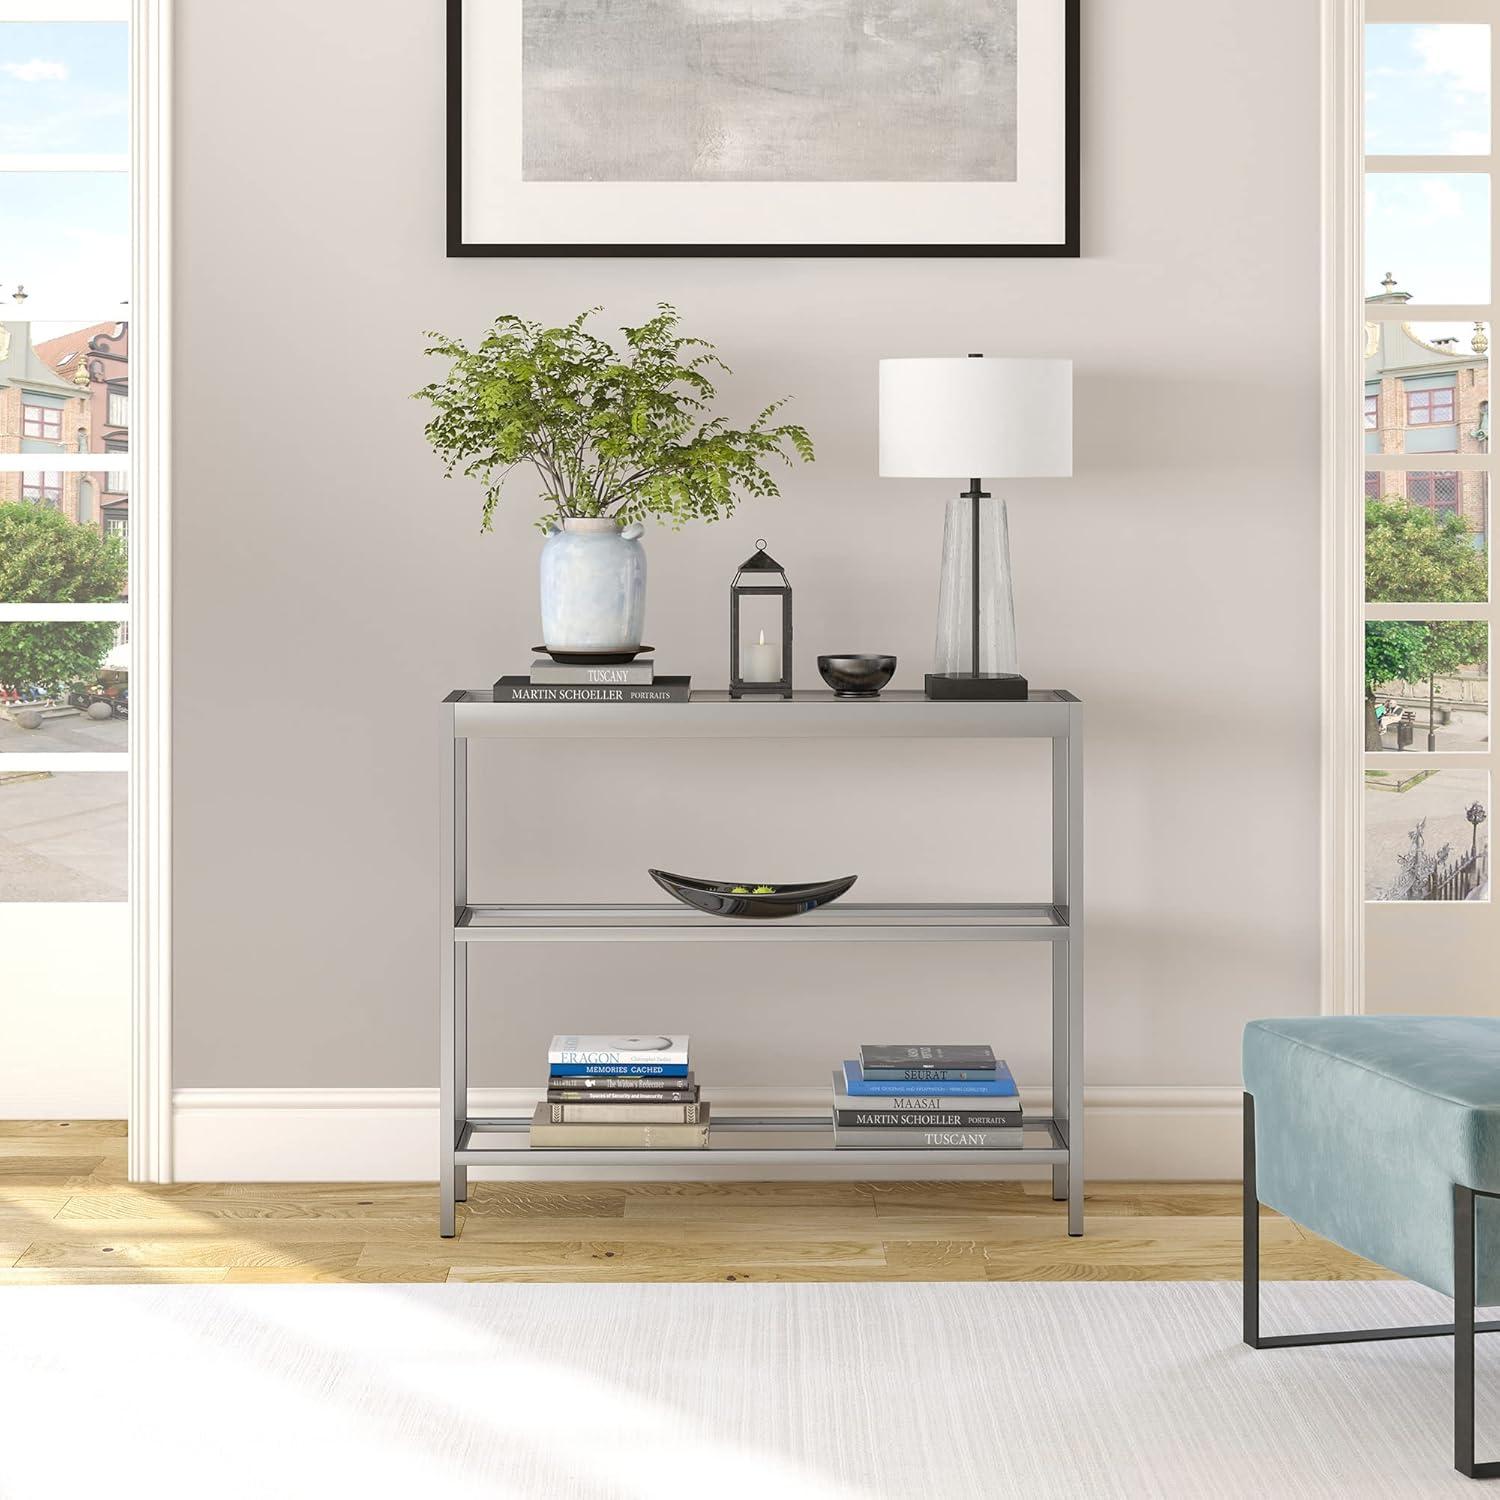 Satin Nickel 36" Wide Metal & Glass Console Table with Storage